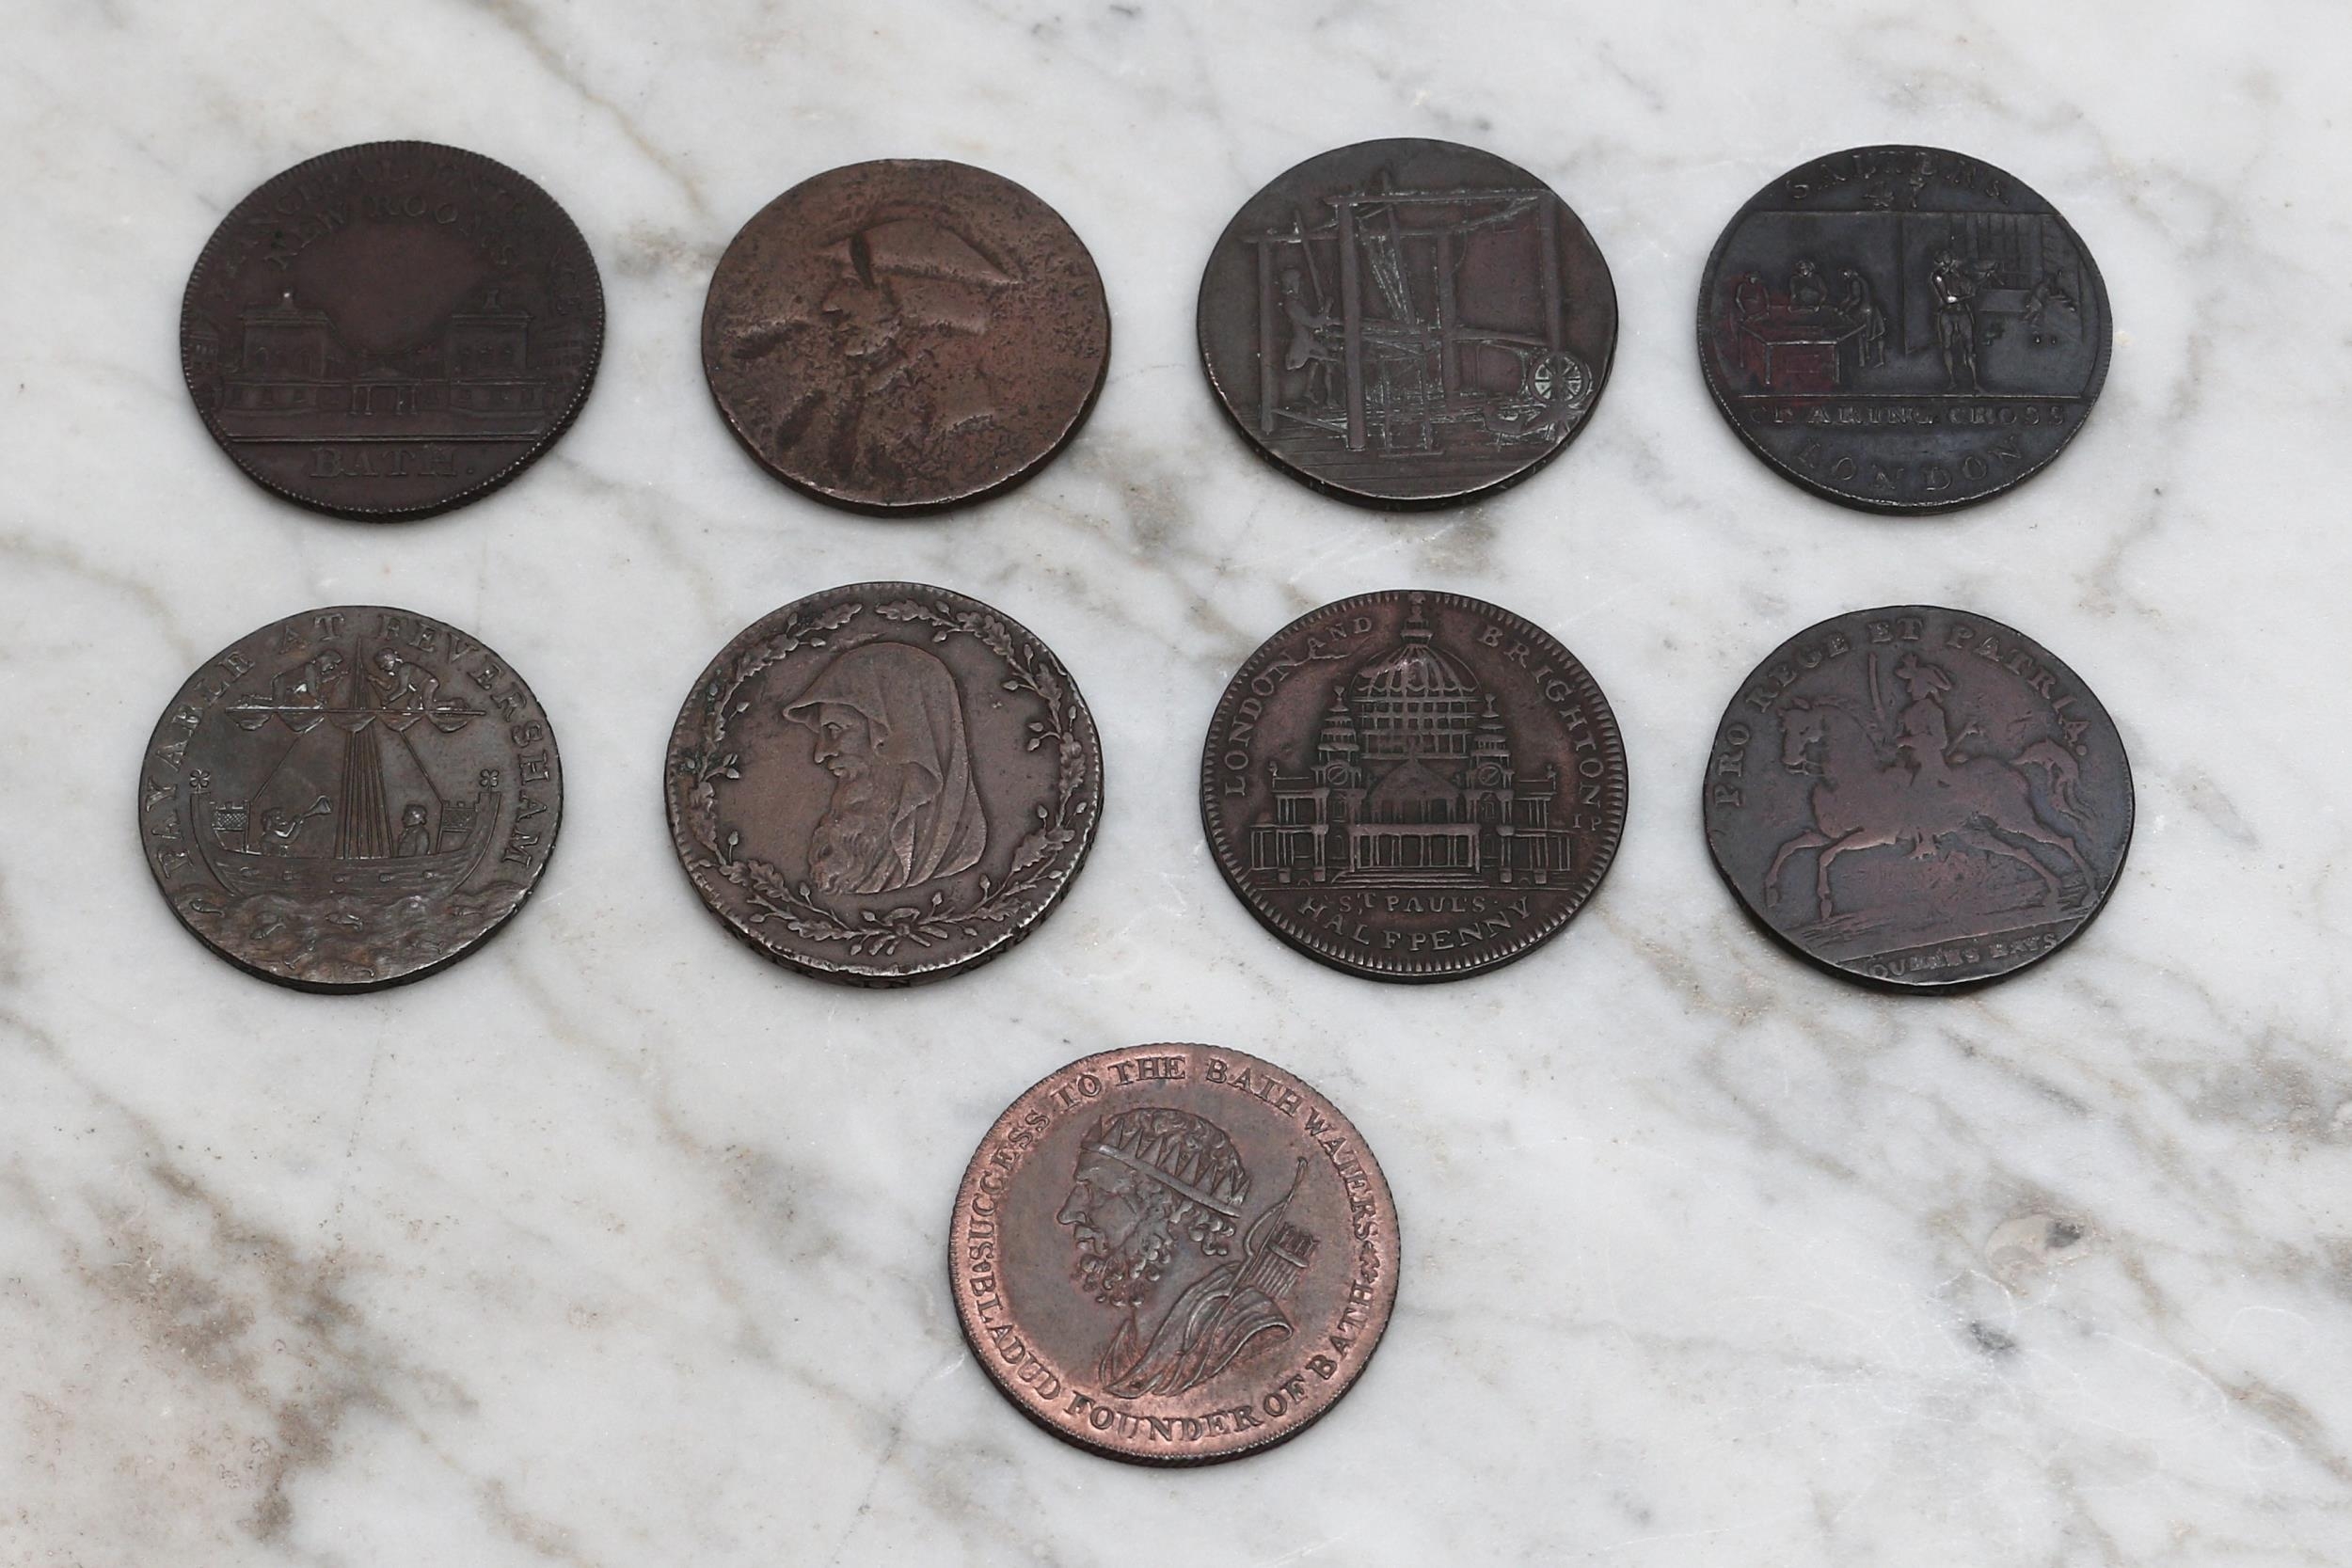 Tokens - London halfpenny, c.1795, Salter's 47 Charing Cross London, Cheapest Hat-Warehouse in the - Image 2 of 2